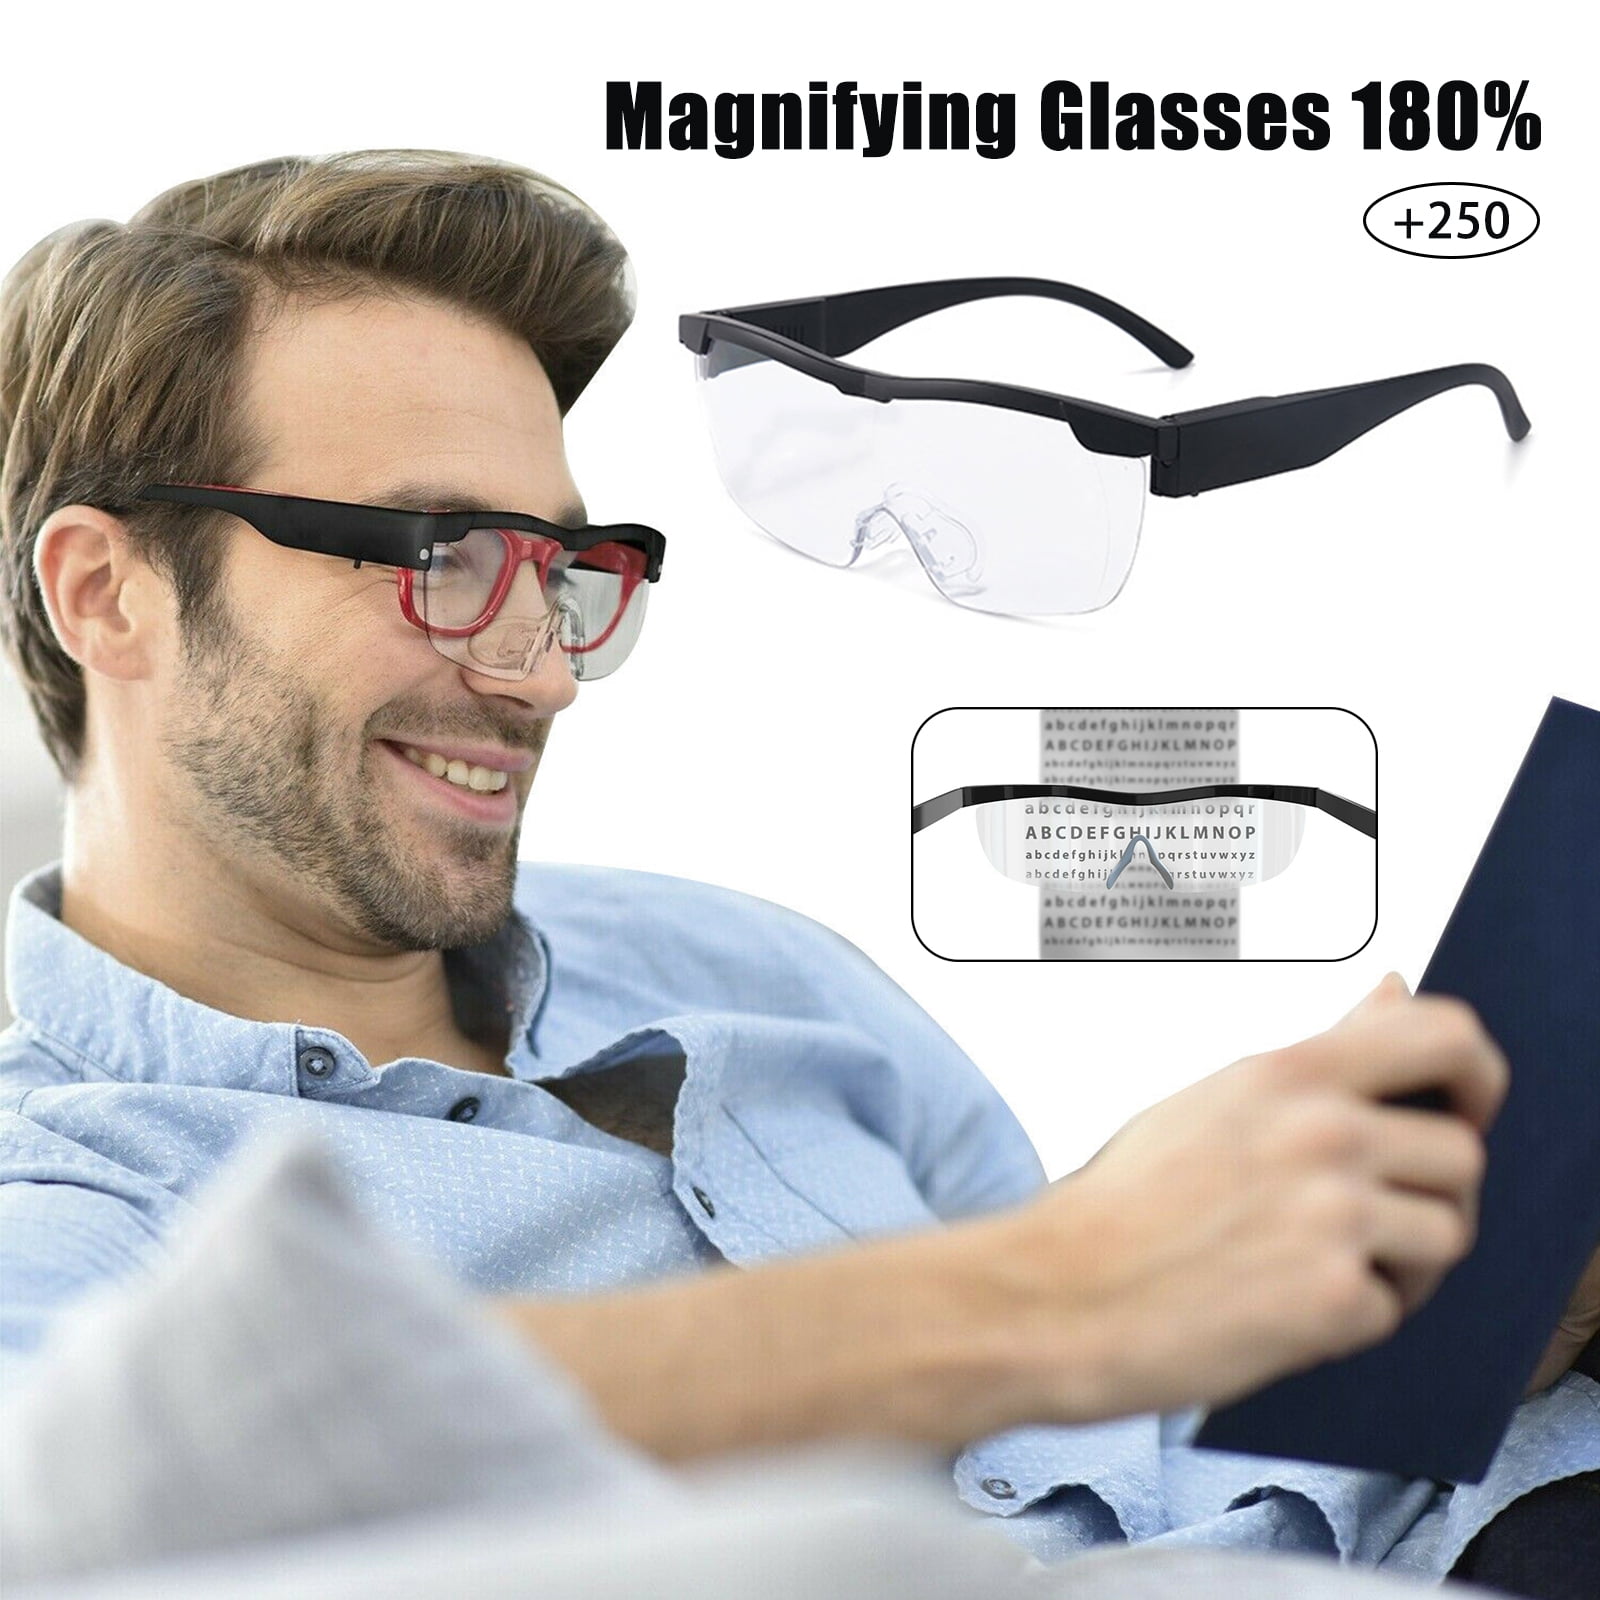 Magnifying glasses for hobbies with light - GSW